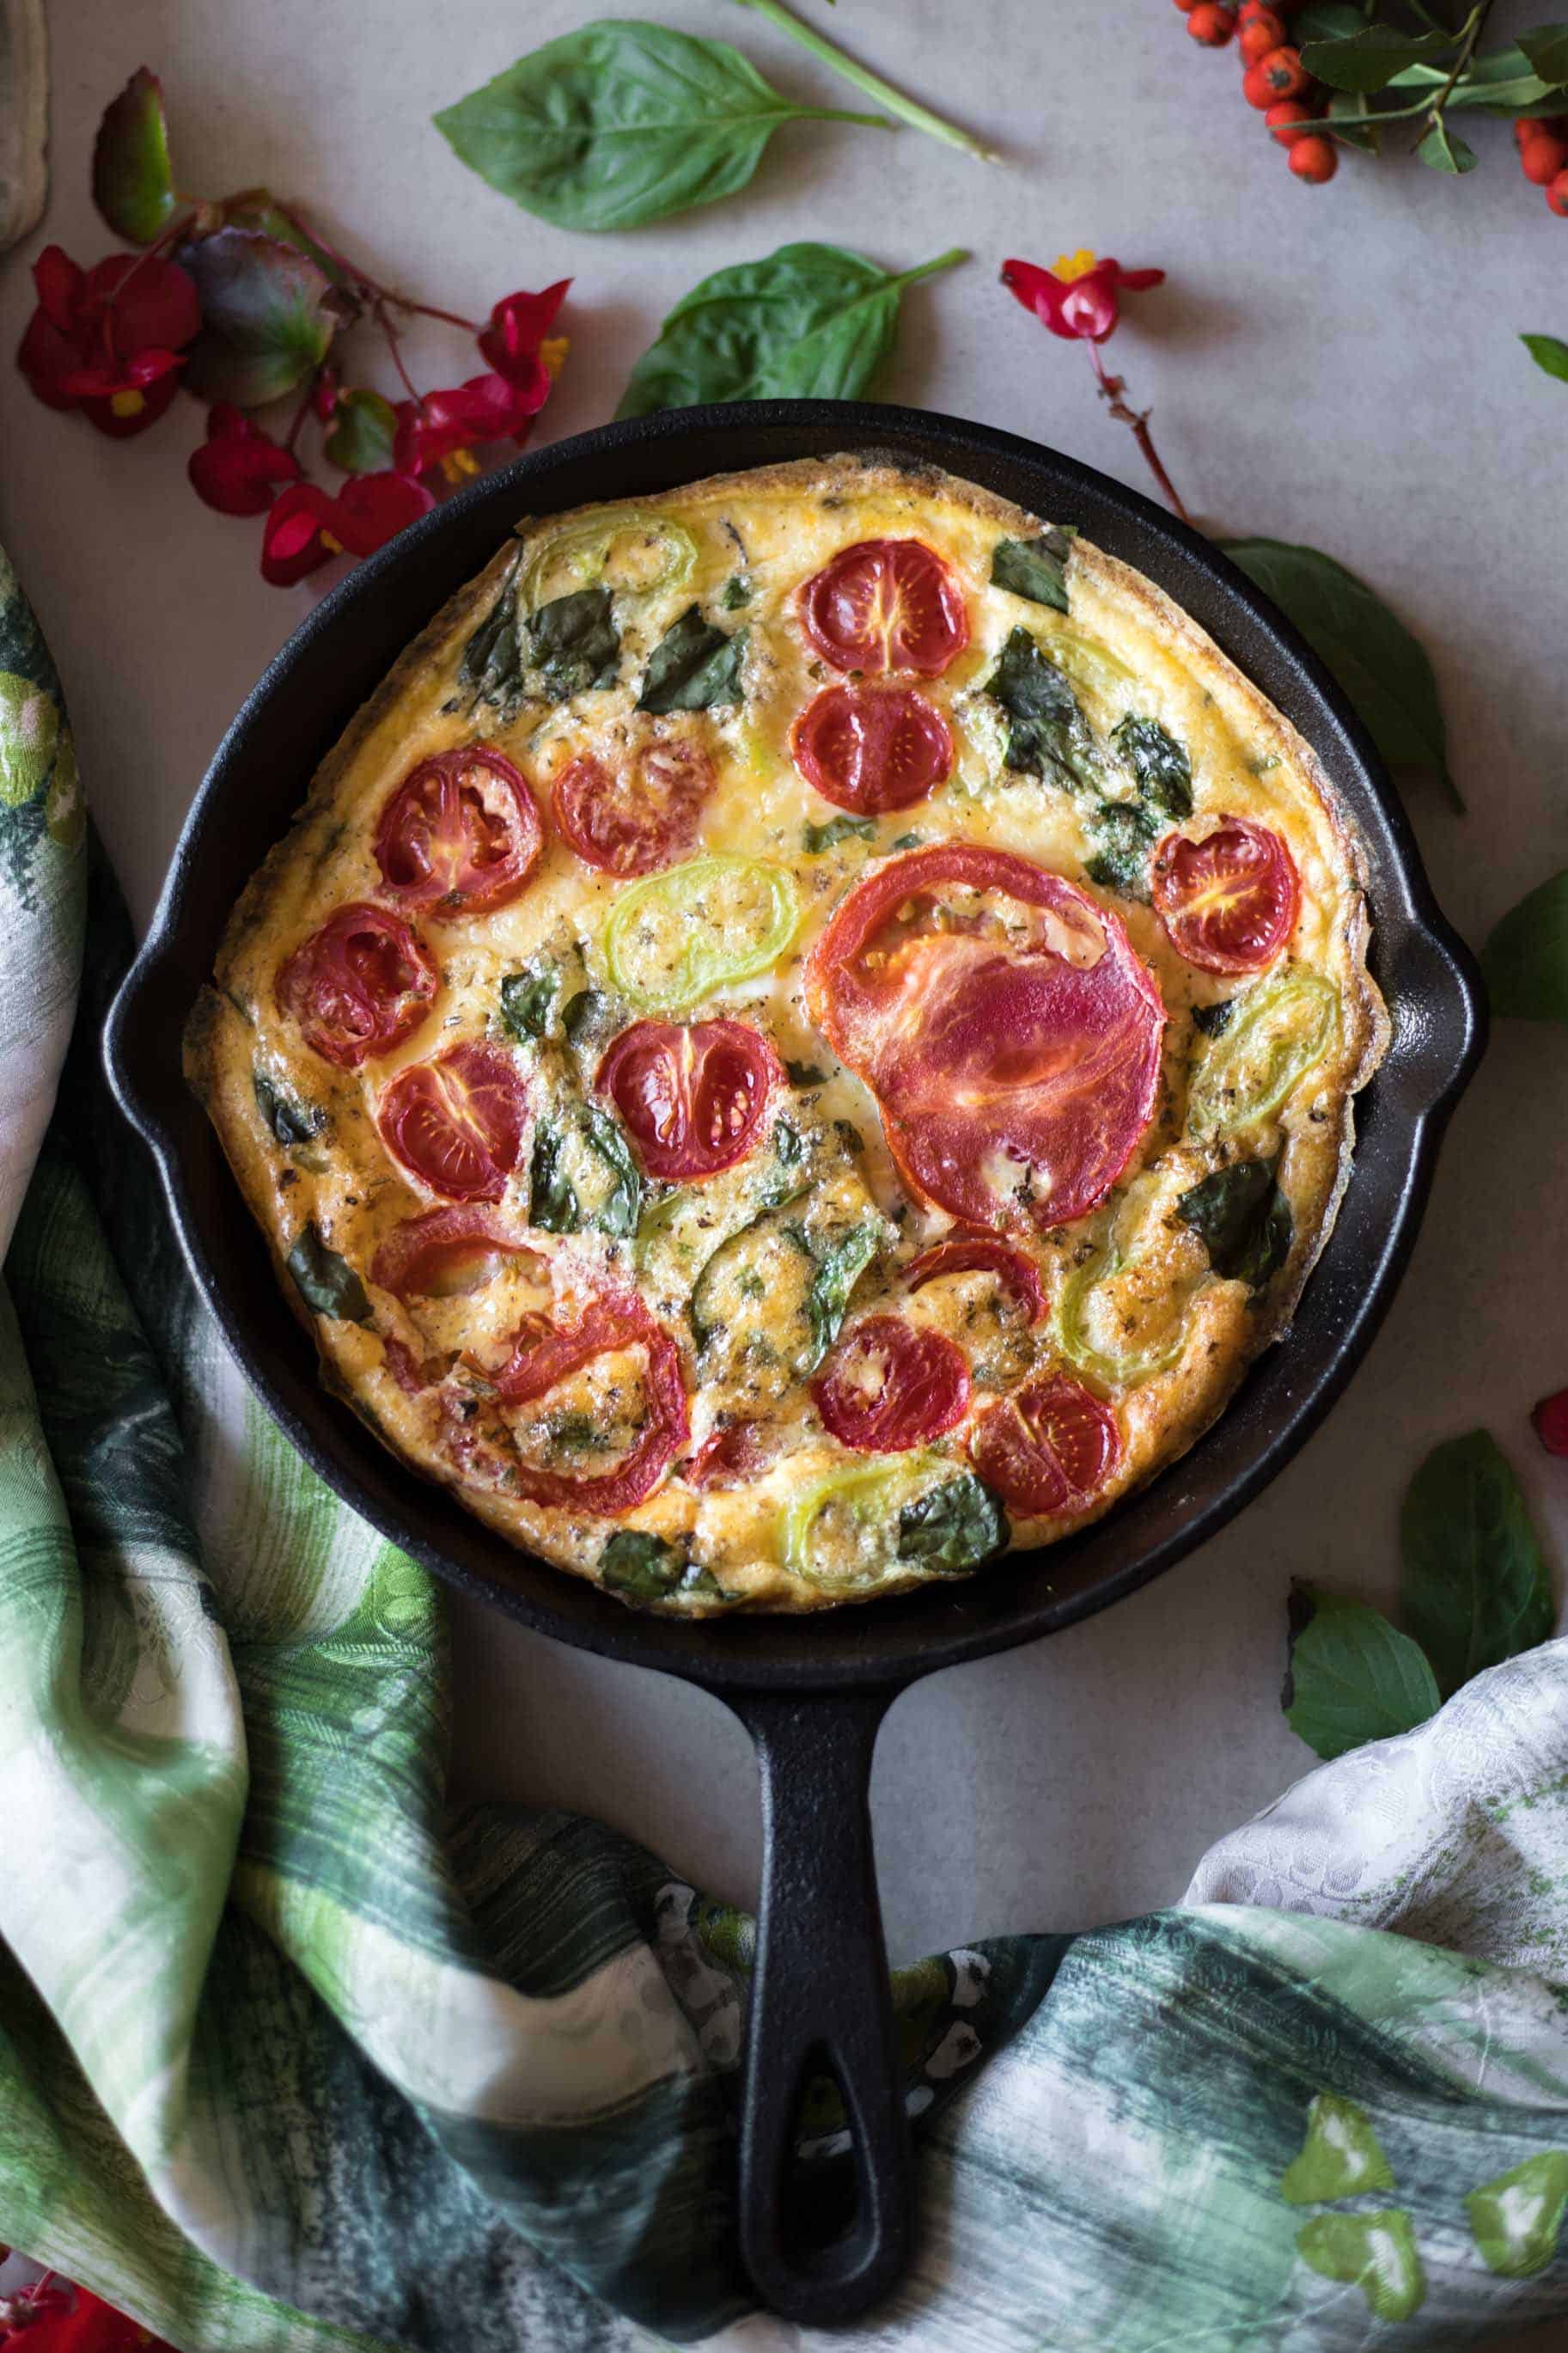 This Low FODMAP Mediterranean Frittata is light, fluffy and easy to digest. Every bite feels like having a piece of summer in your mouth